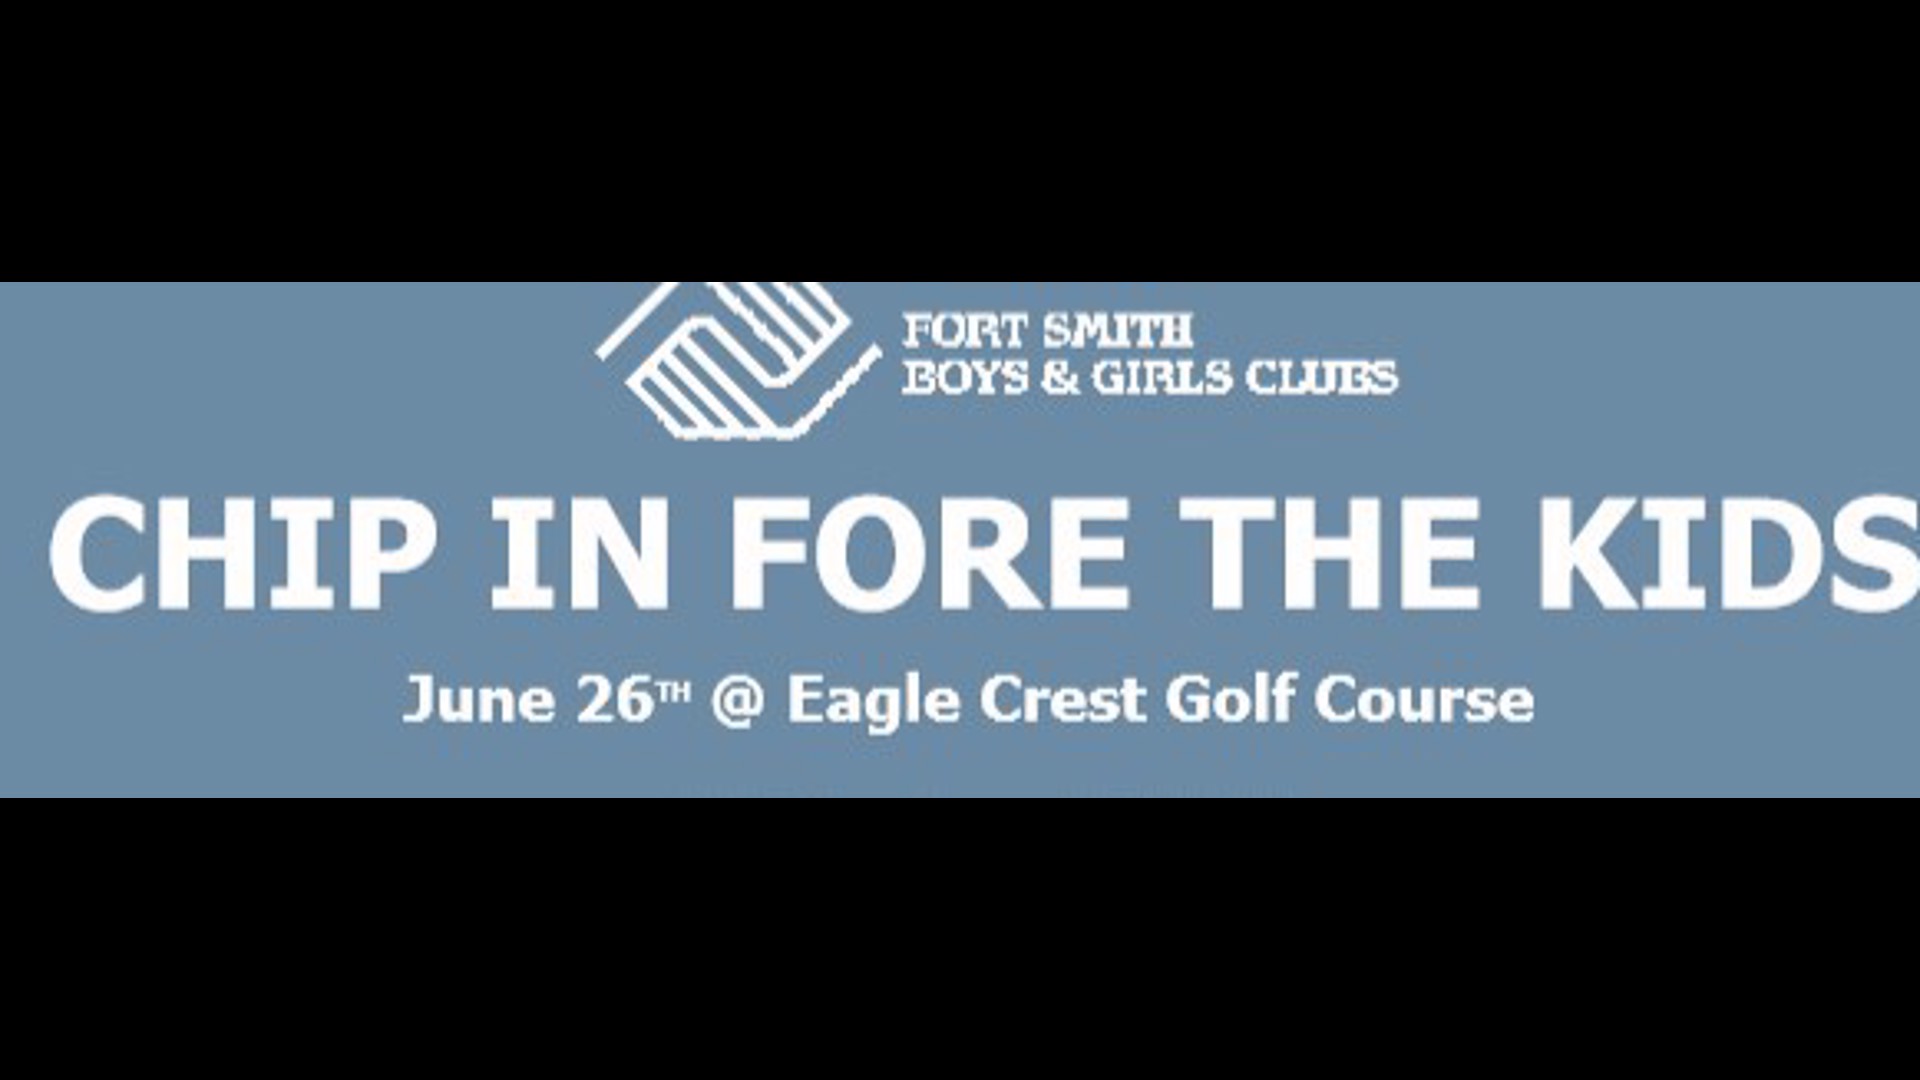 The tournament is set for June 26th at Eagle Crest in Alma.  Daren finds out how to register and more about summer programs at the clubs.